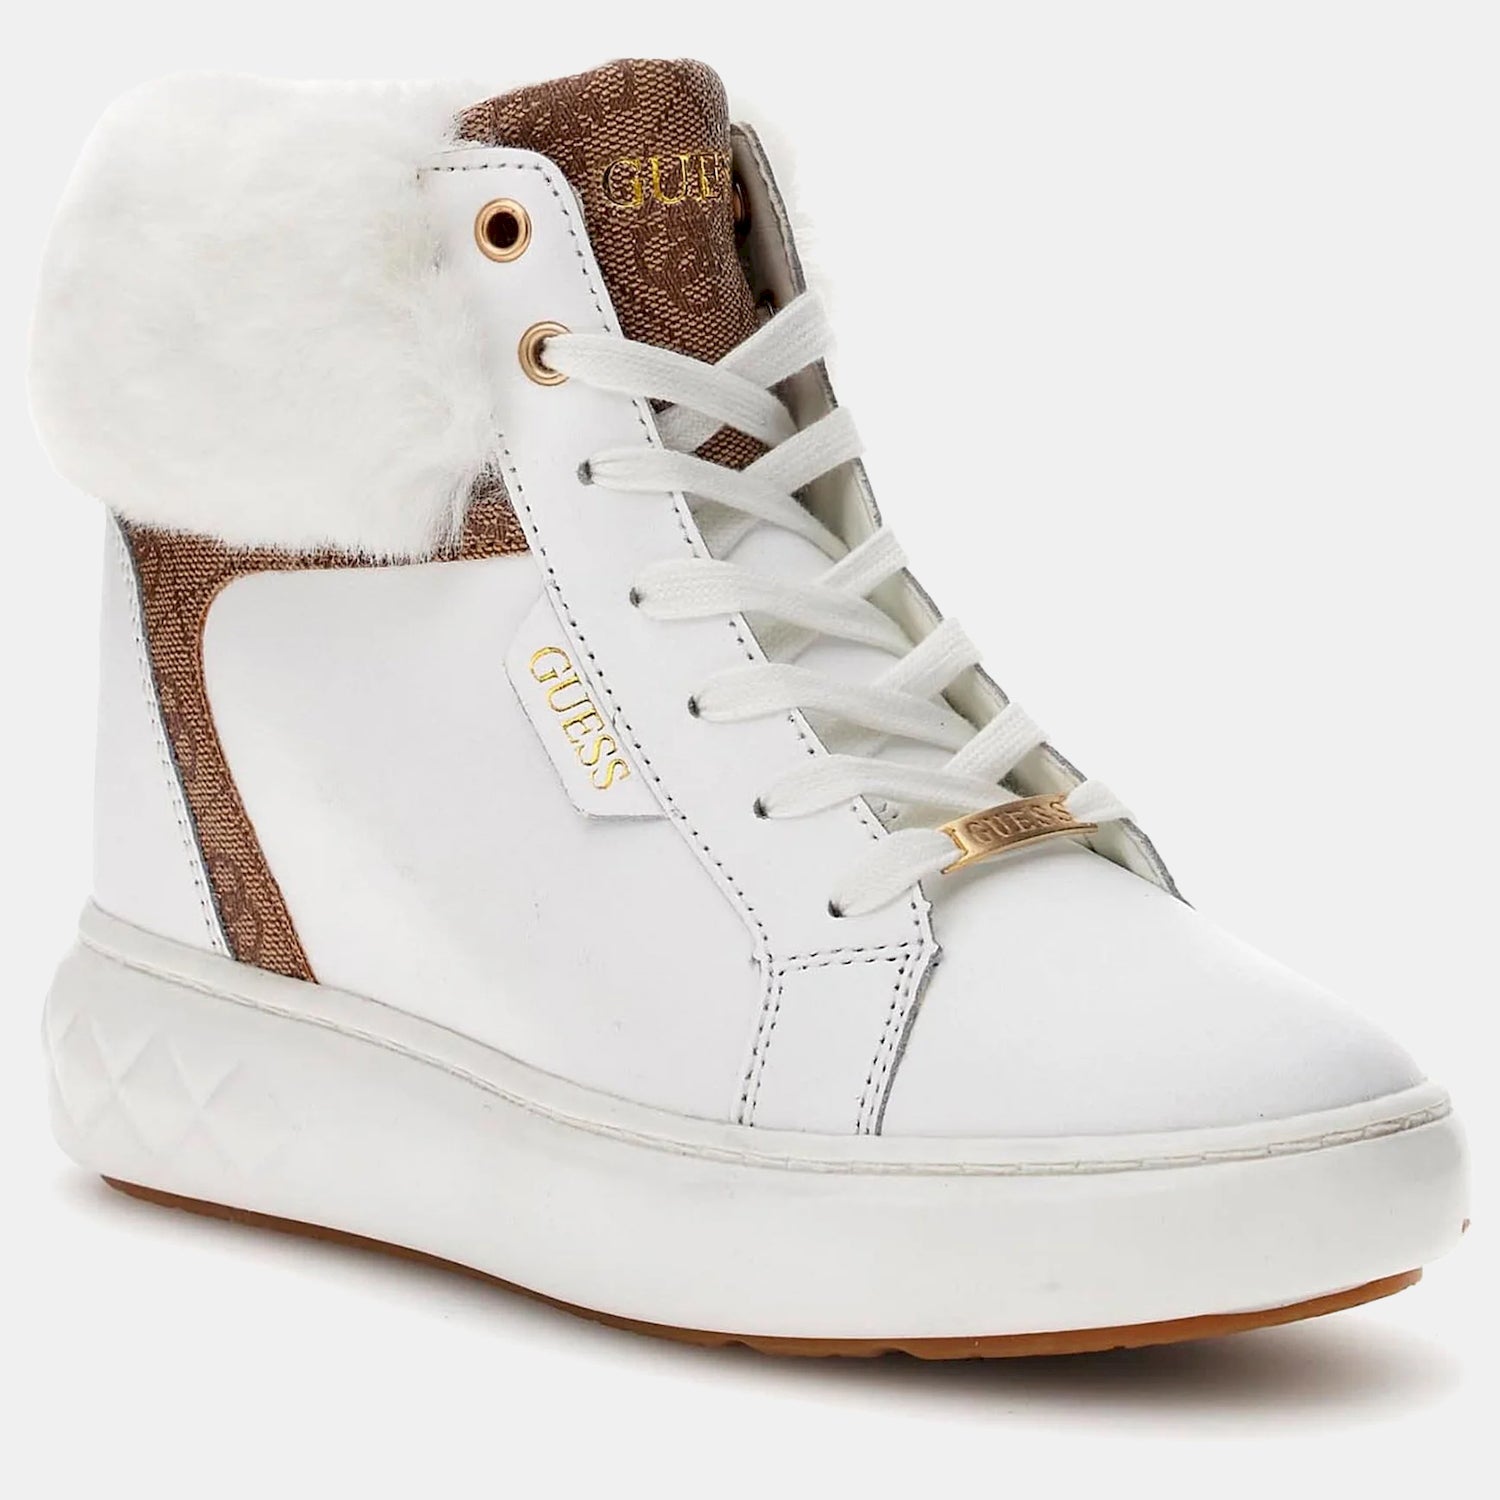 guess-sapatilhas-bota-sneakers-boots-fl8rox-whi-brown-branco-castanho3